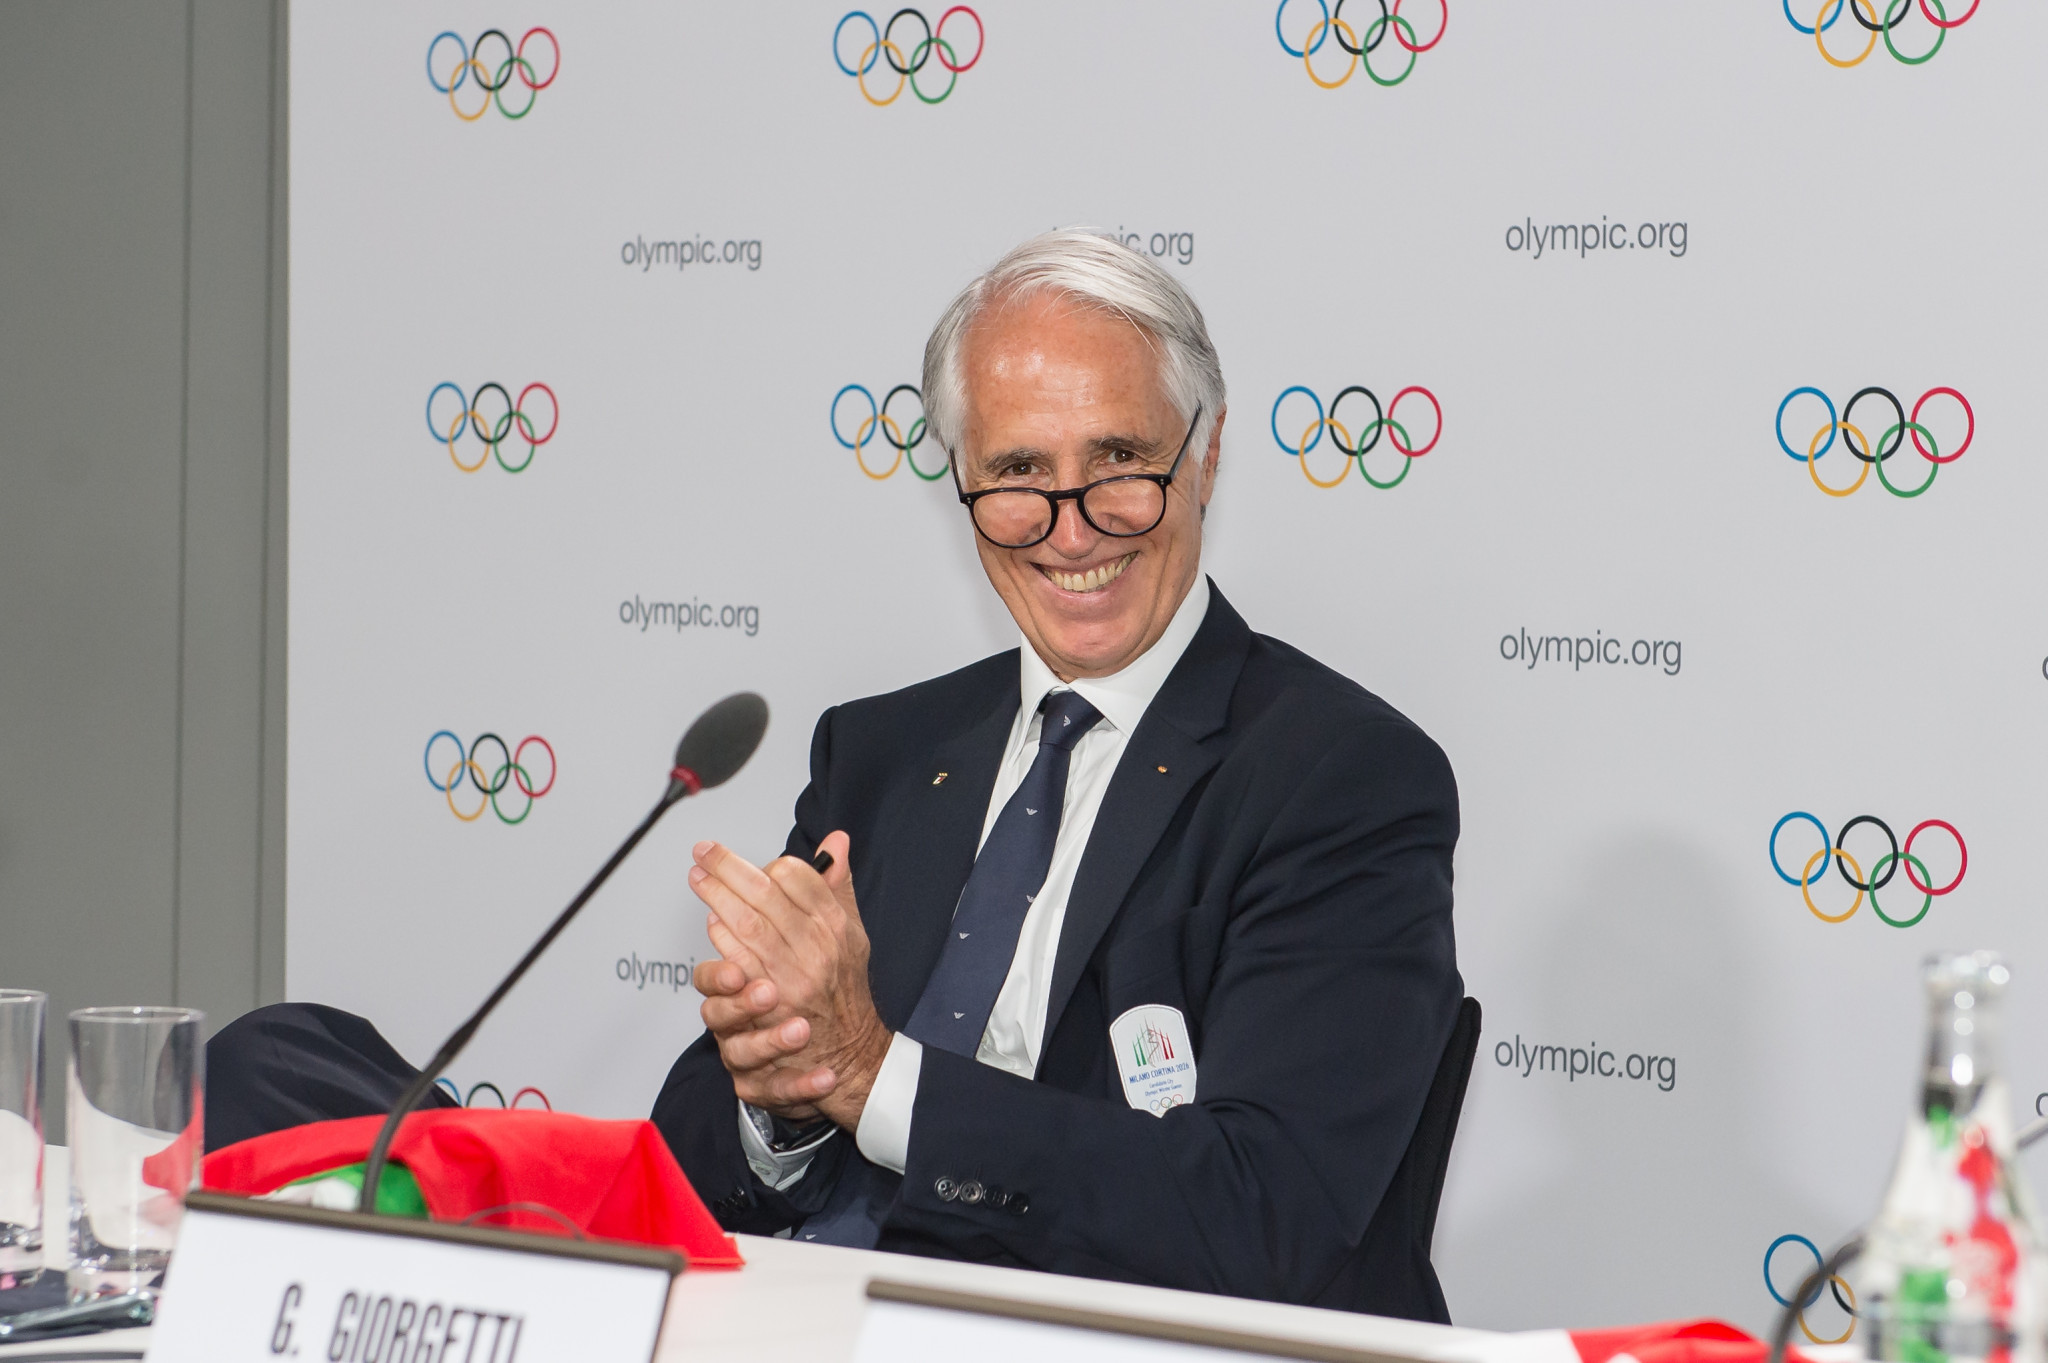 Giovanni Malagò heads the Milan Cortina 2026 Organising Committee after leading their successful bid for the Games ©Getty Images